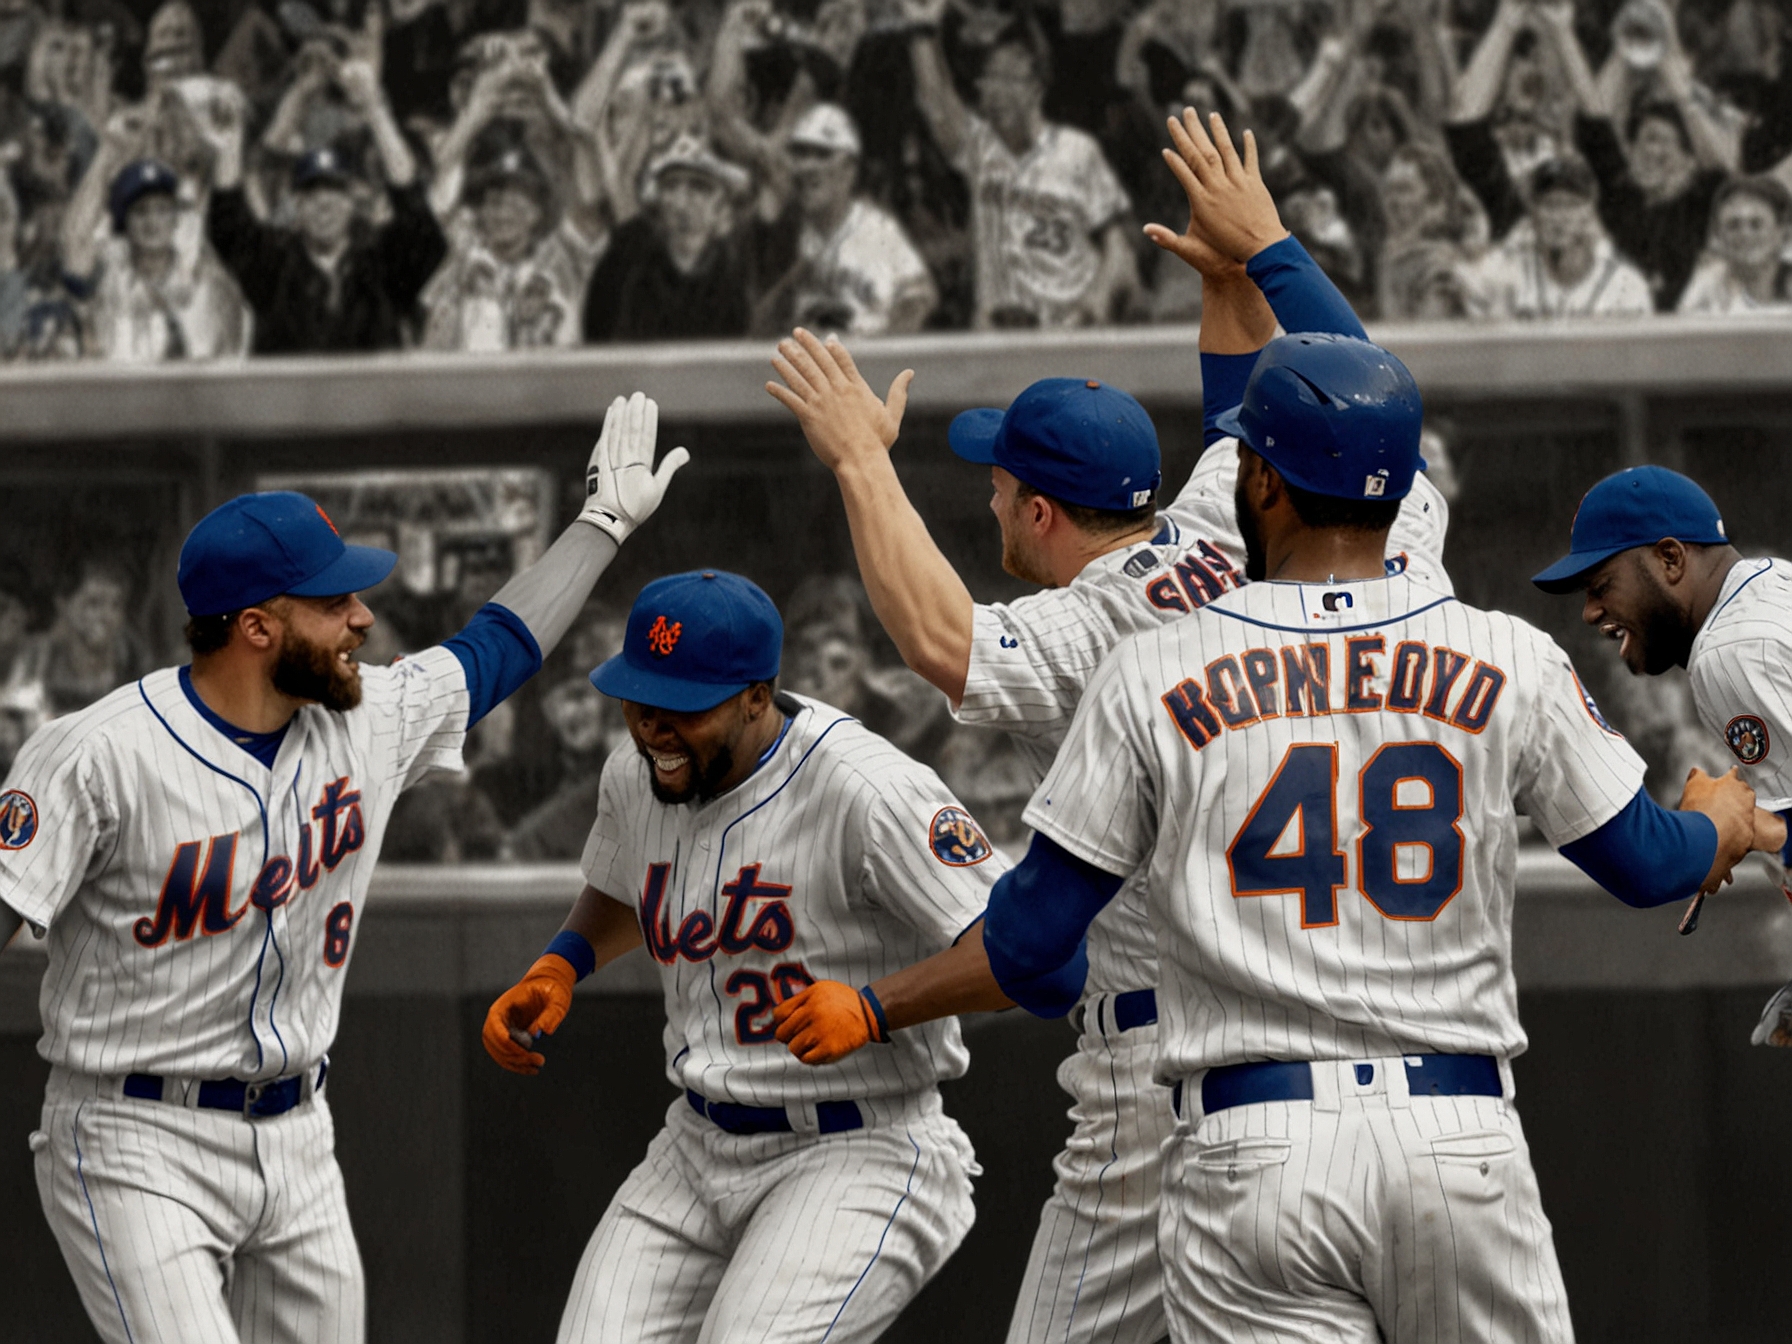 The Mets' players celebrating their decisive 12-2 victory over the Yankees post-game. The image highlights the team's morale boost and momentum in the season.